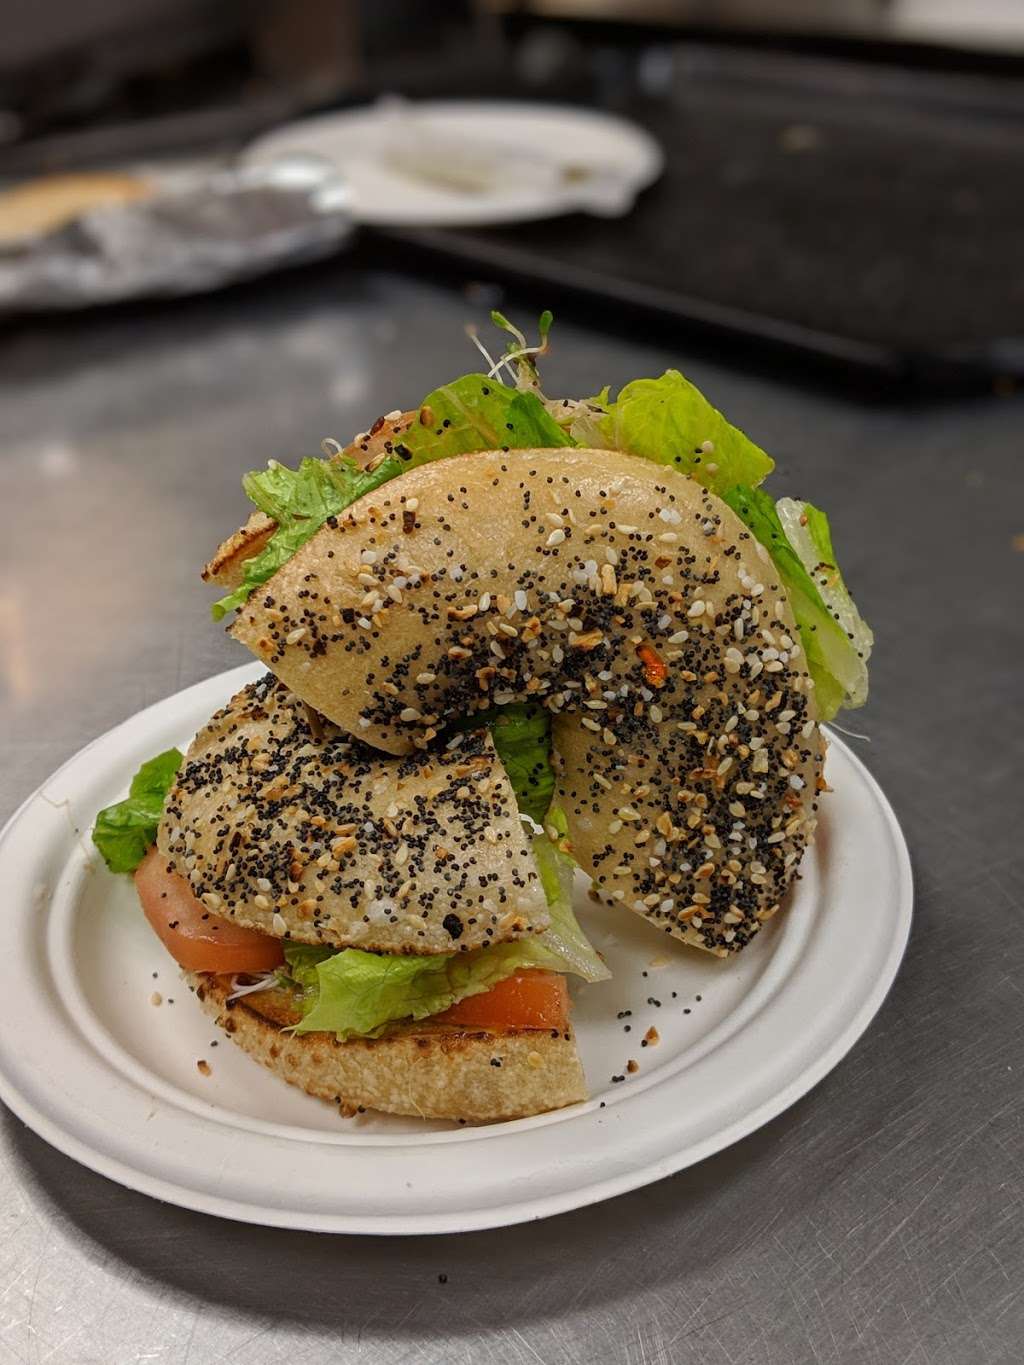 Roland Park Bagel & Burgers | 500 W Cold Spring Ln, Baltimore, MD 21210, USA | Phone: (410) 889-3333